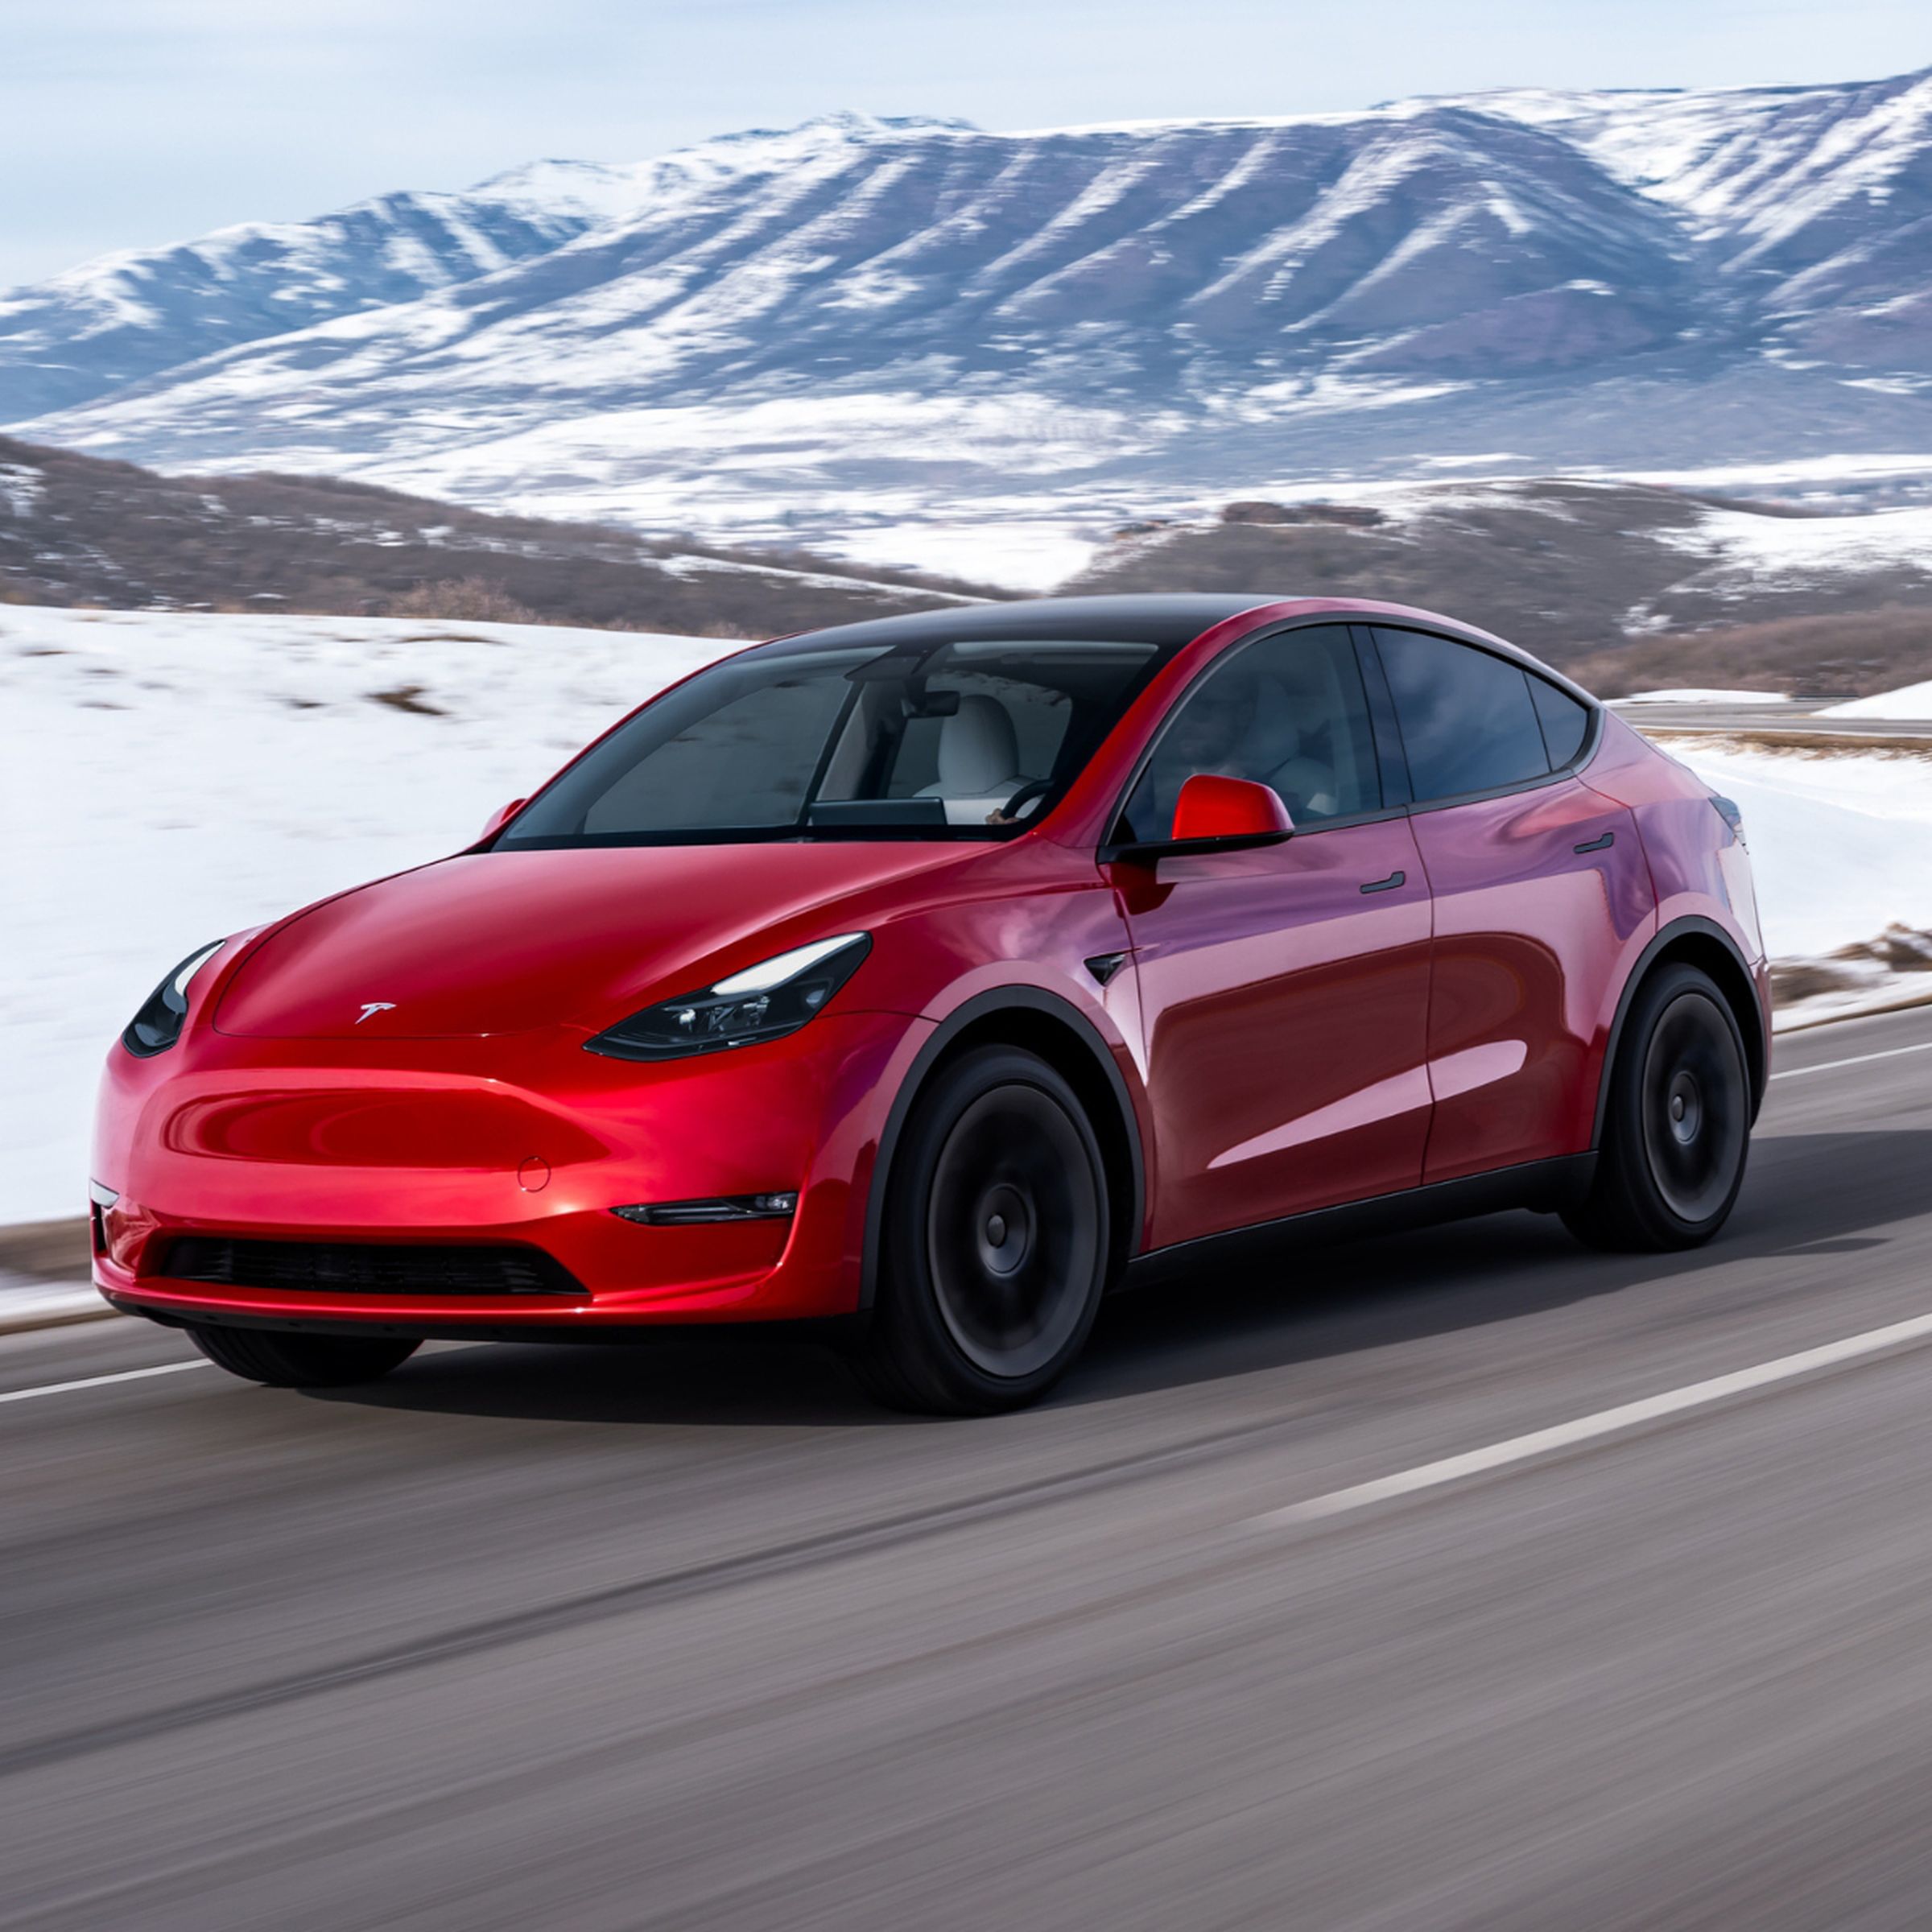 A red Tesla Model Y driving through a snowy, mountainous landscape.